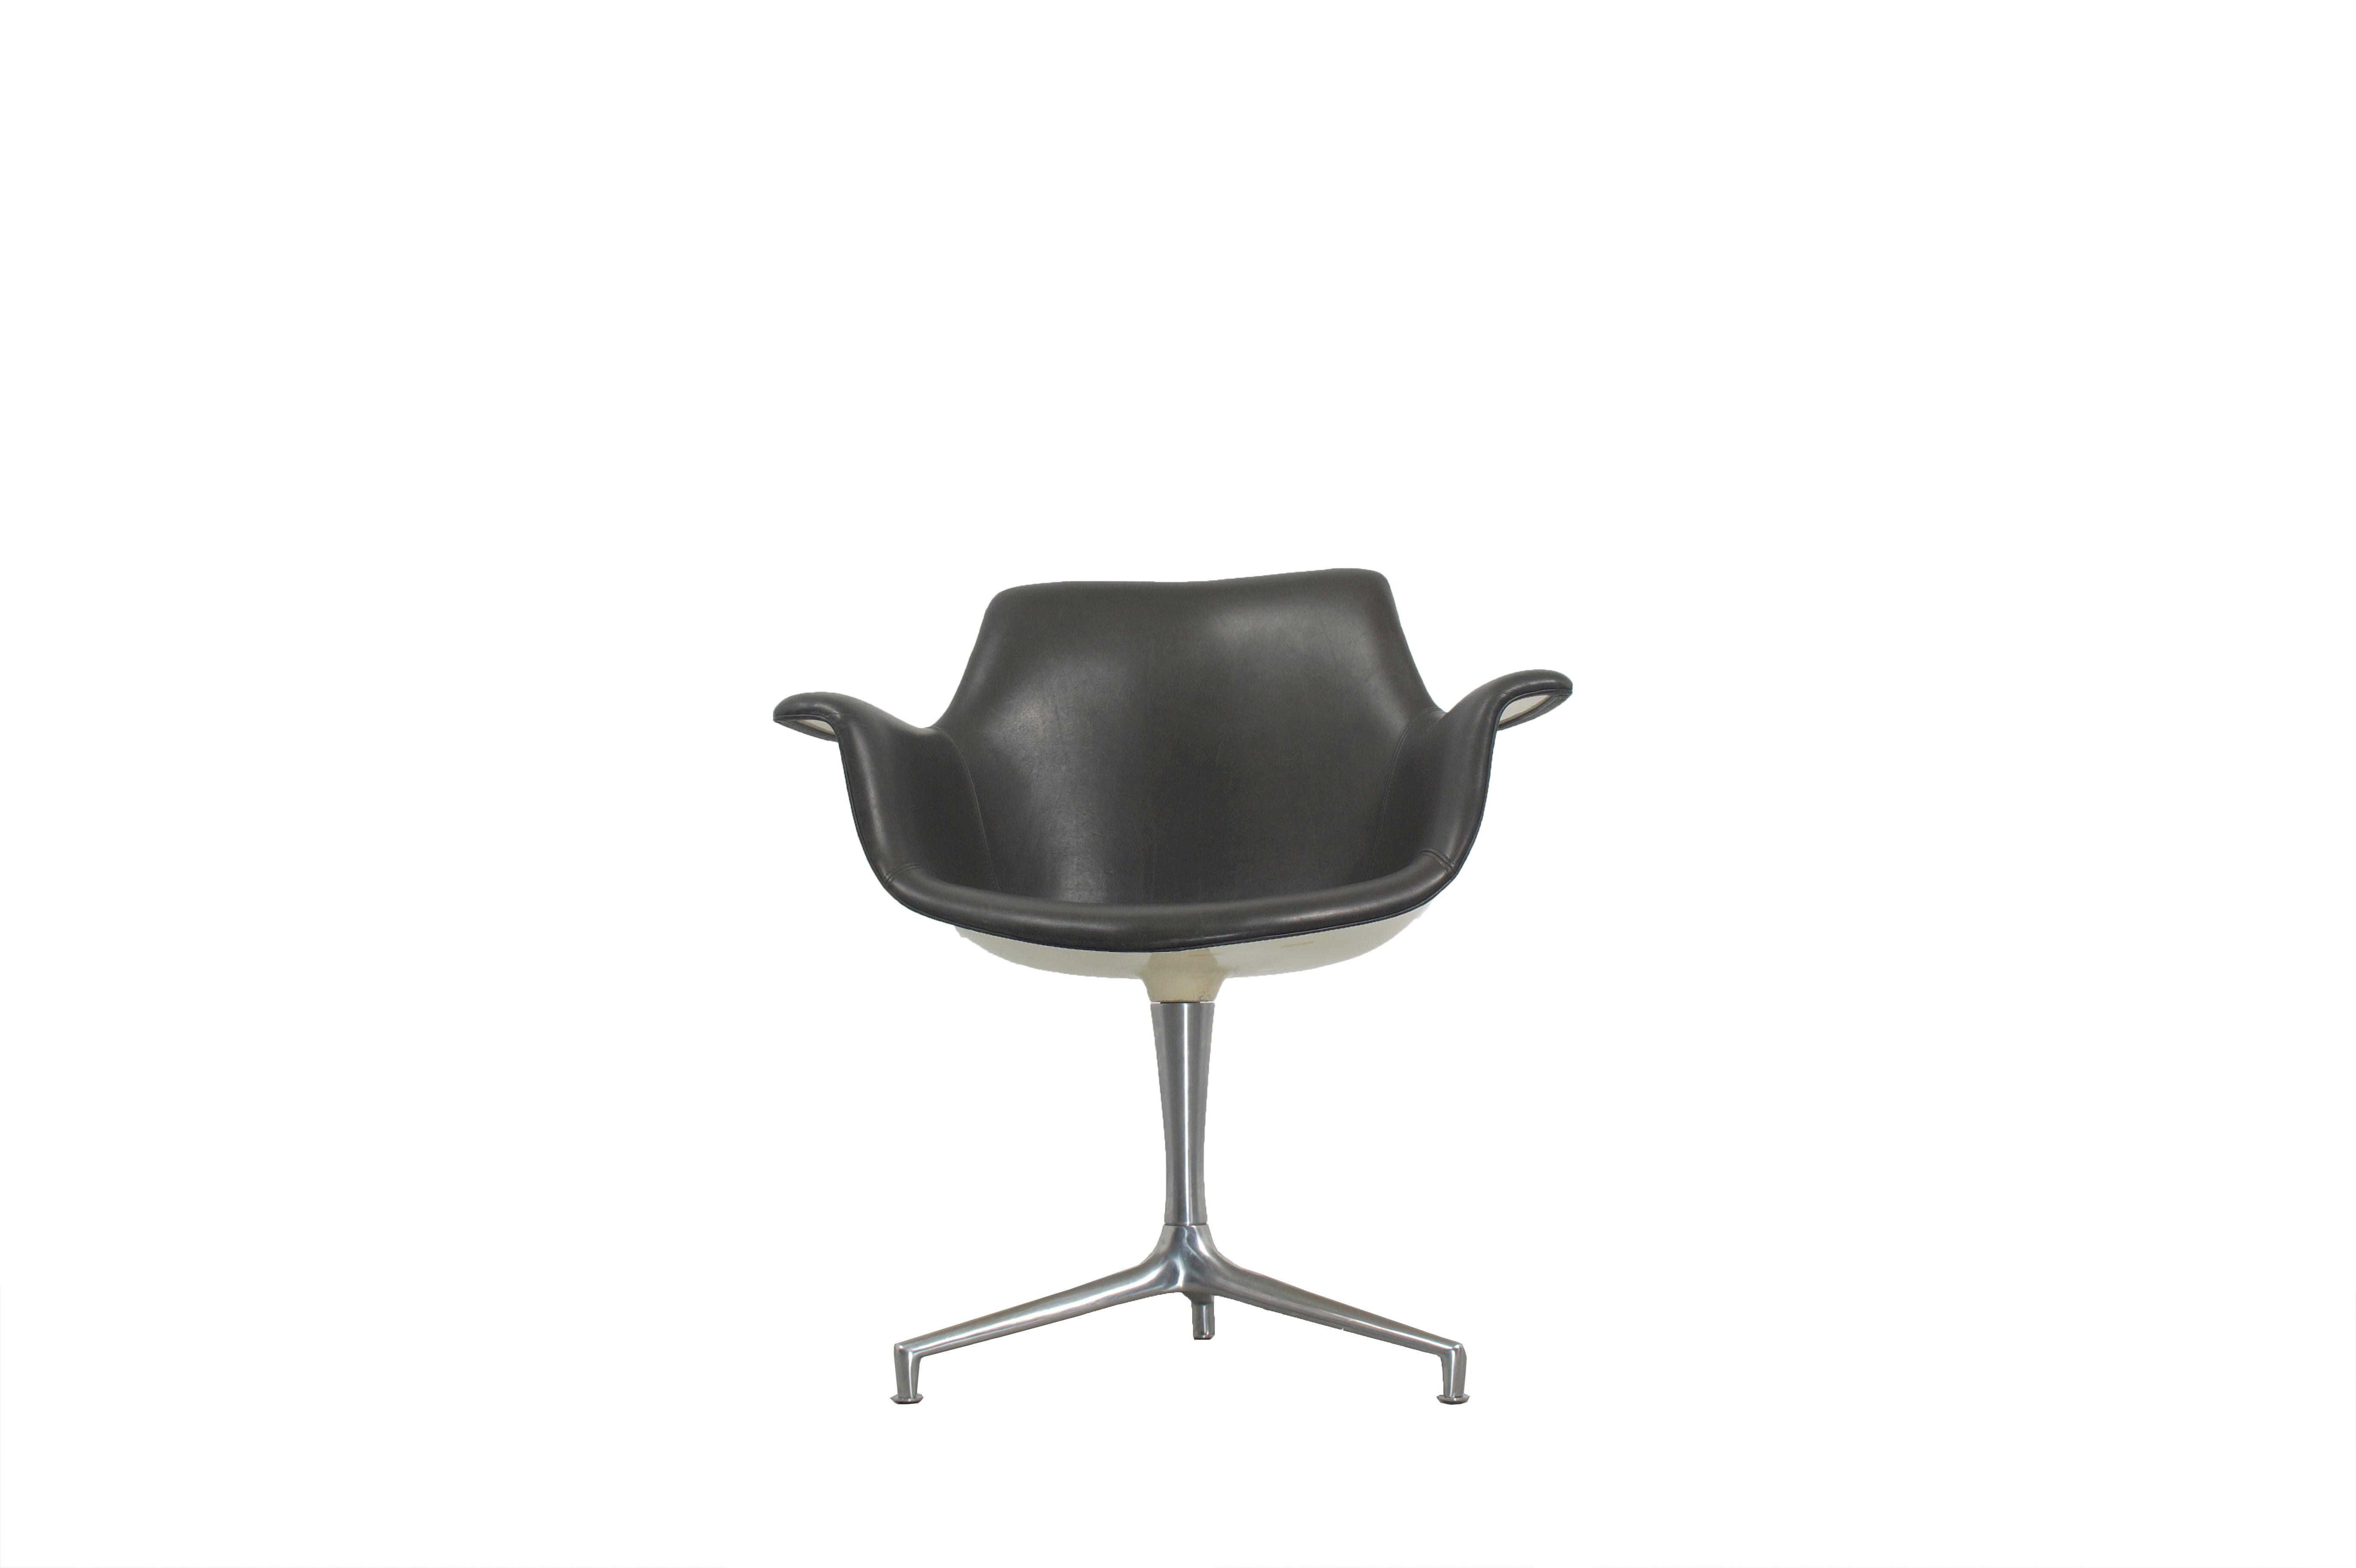 Rare leather executive armchair JK810 designed by Jorgen Kastholm and manufactured by German manufacturer Alfred Kill International. 

The fiberglass shell is laquered and upholstered in black natural-leather and rests on the The chromed,